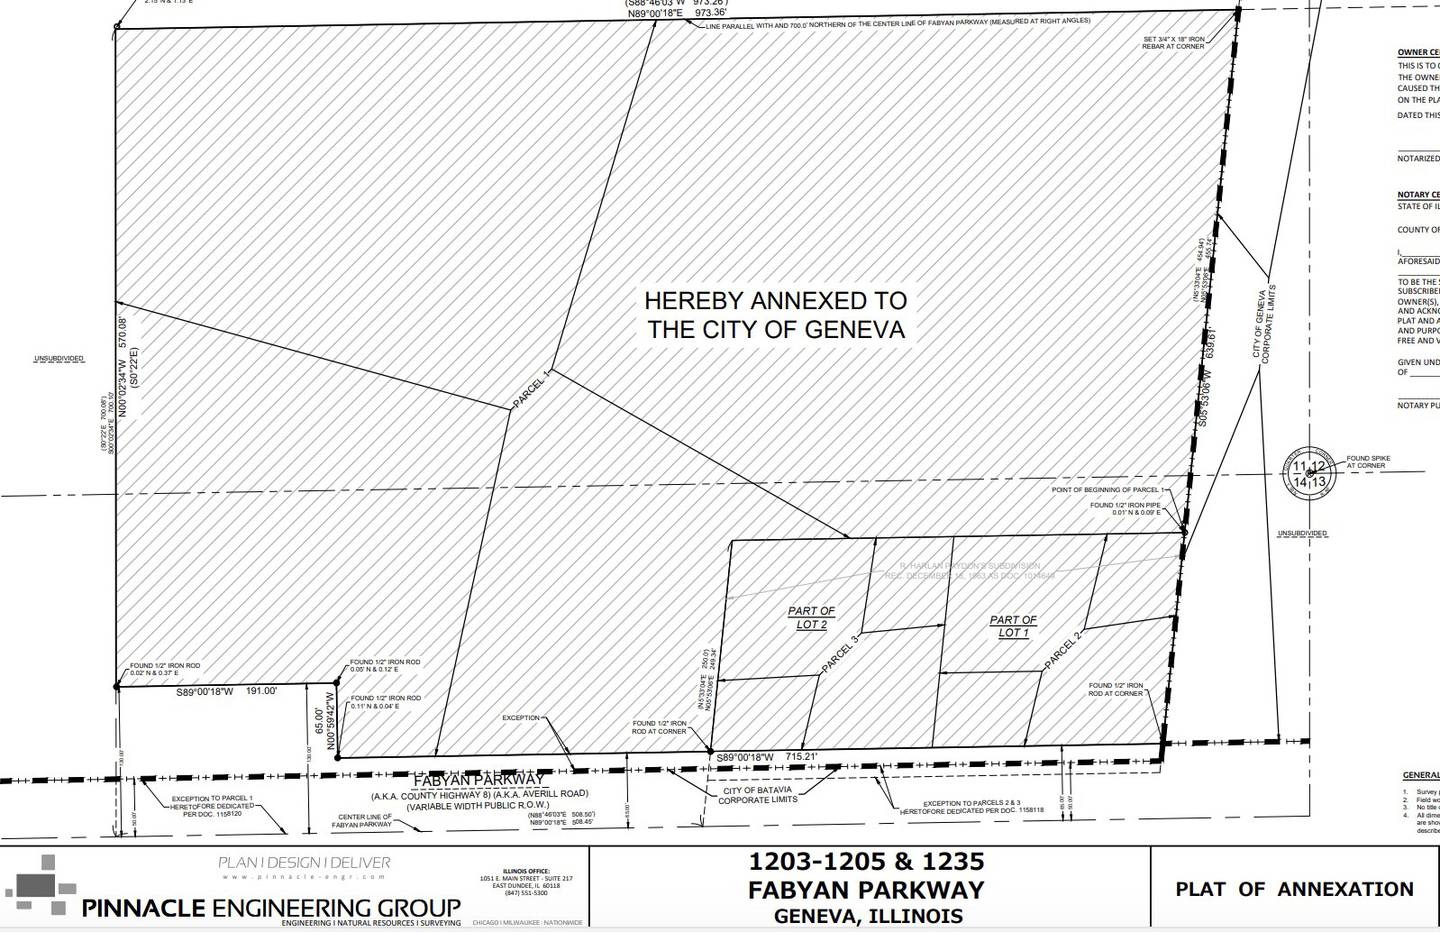 The Geneva City Council approved the annexation of 13.42 acres to be developed as an industrial warehouse on the north side of Fabyan Parkway, west of Kirk Road.